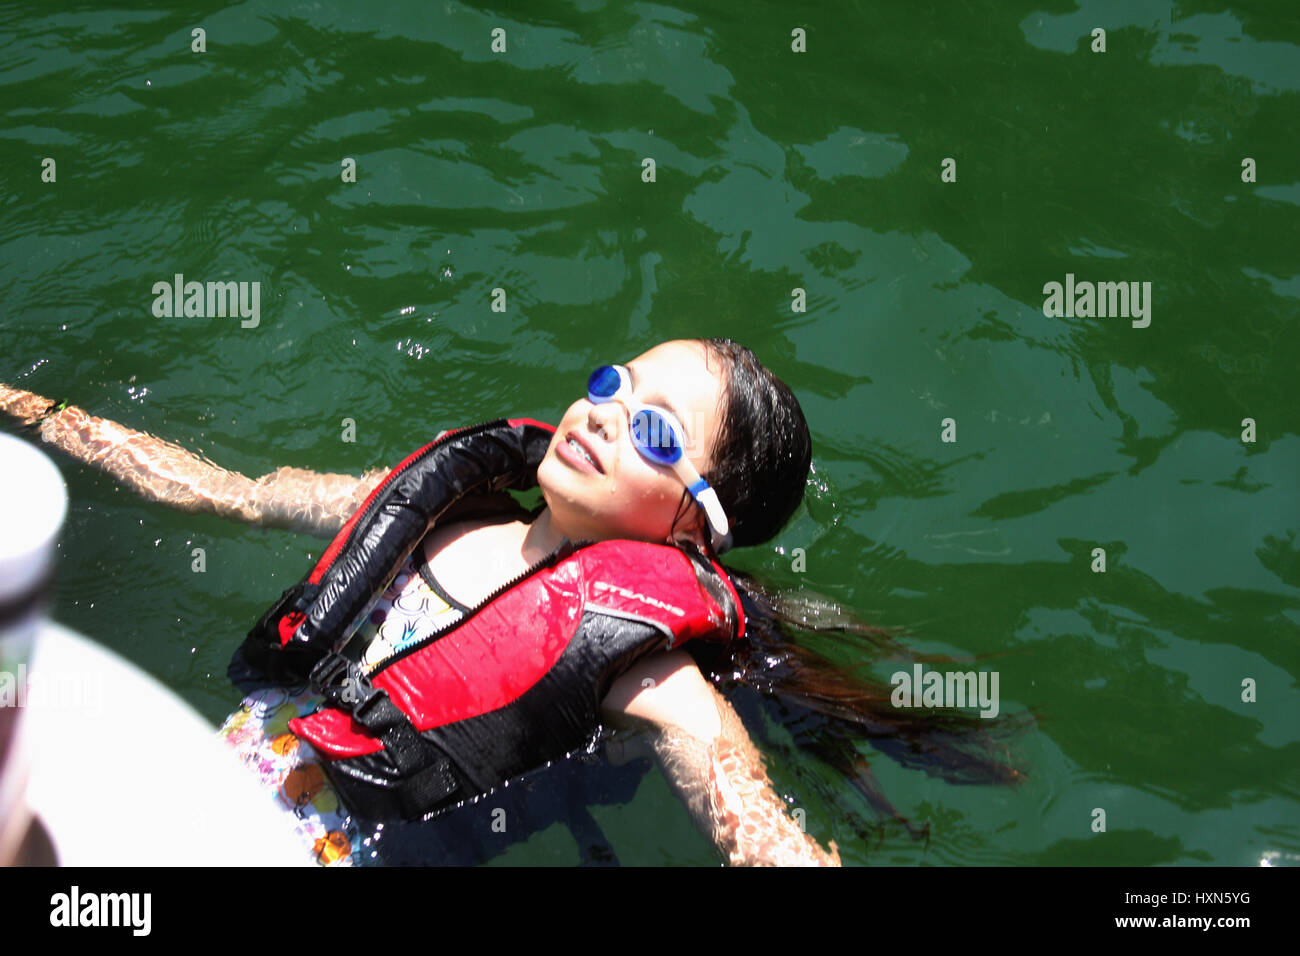 Young girl floating in water with safety vest and goggles Stock Photo